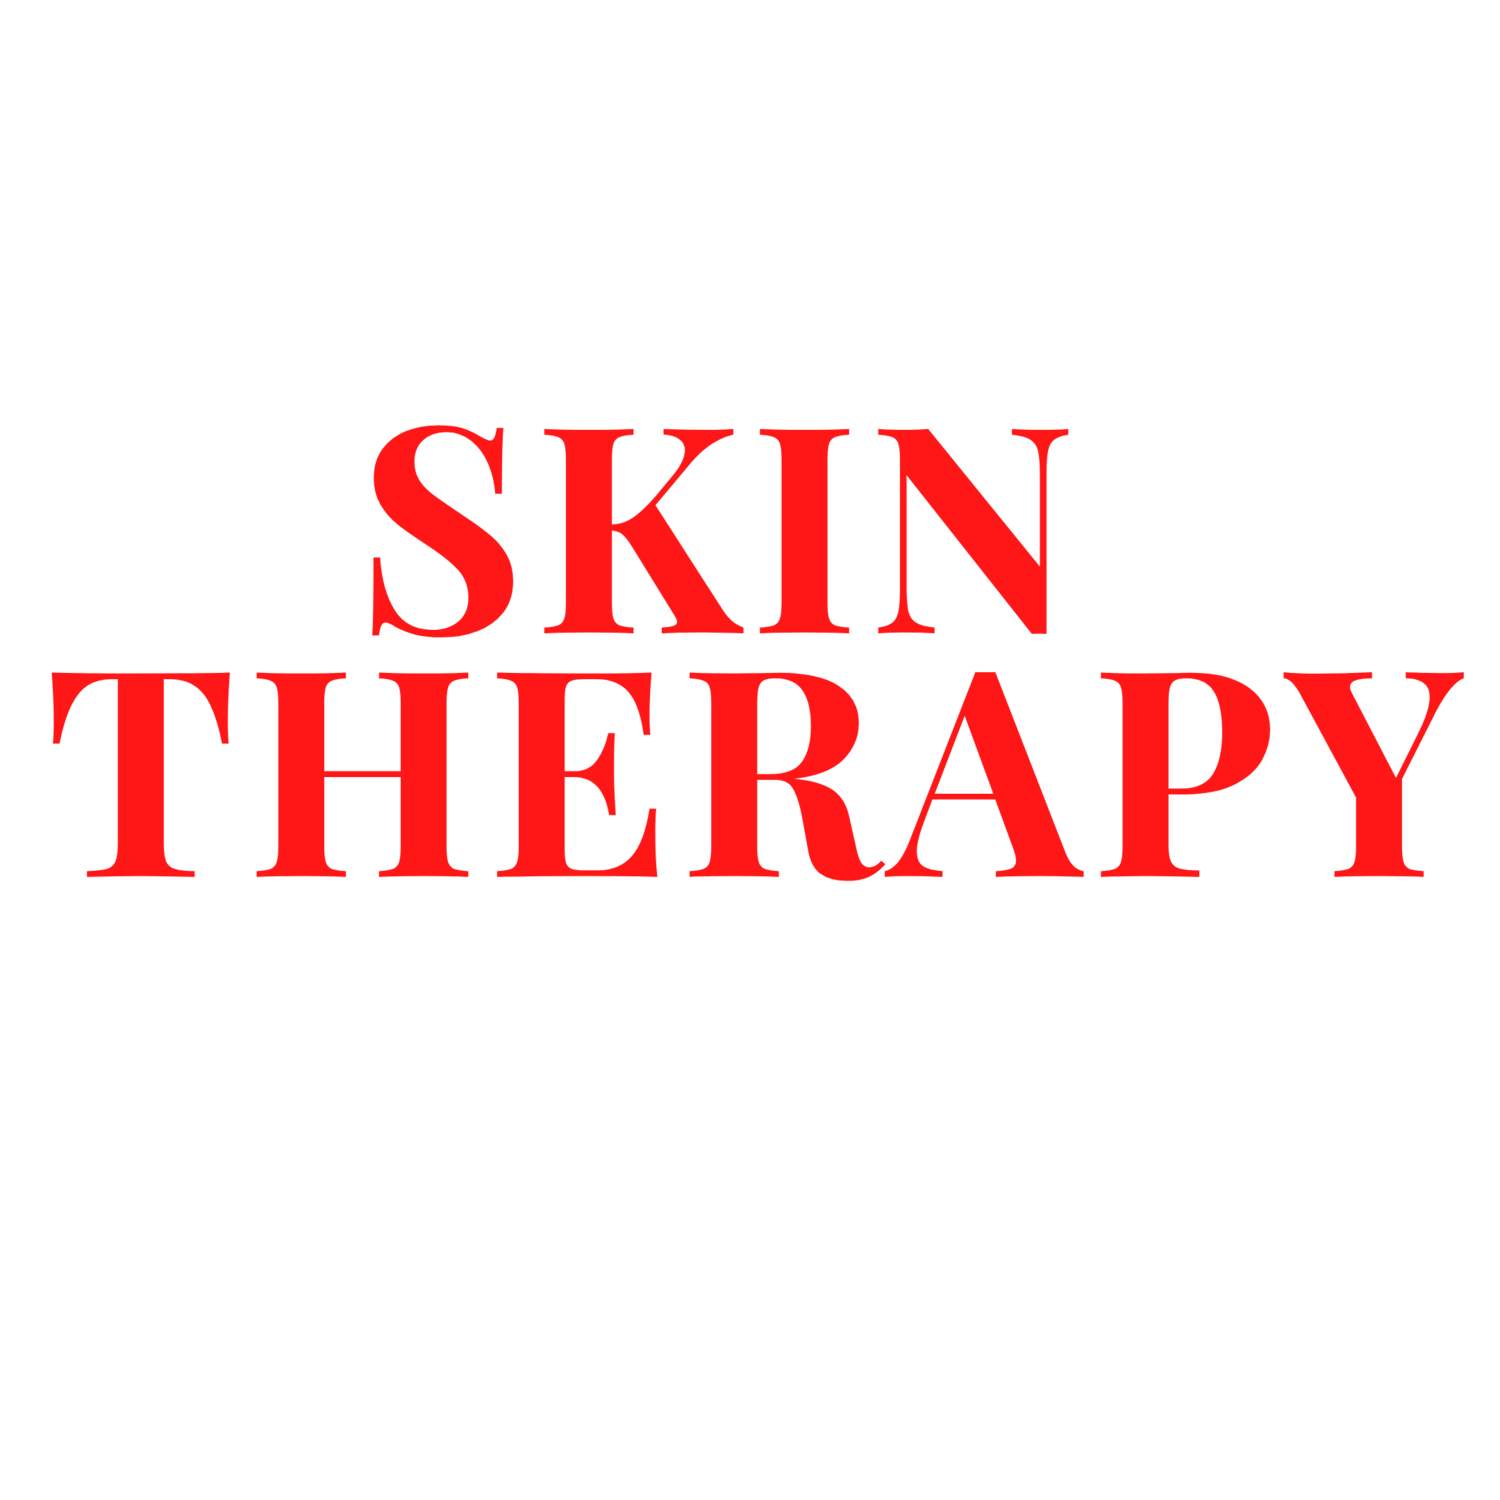 Skin Therapy 